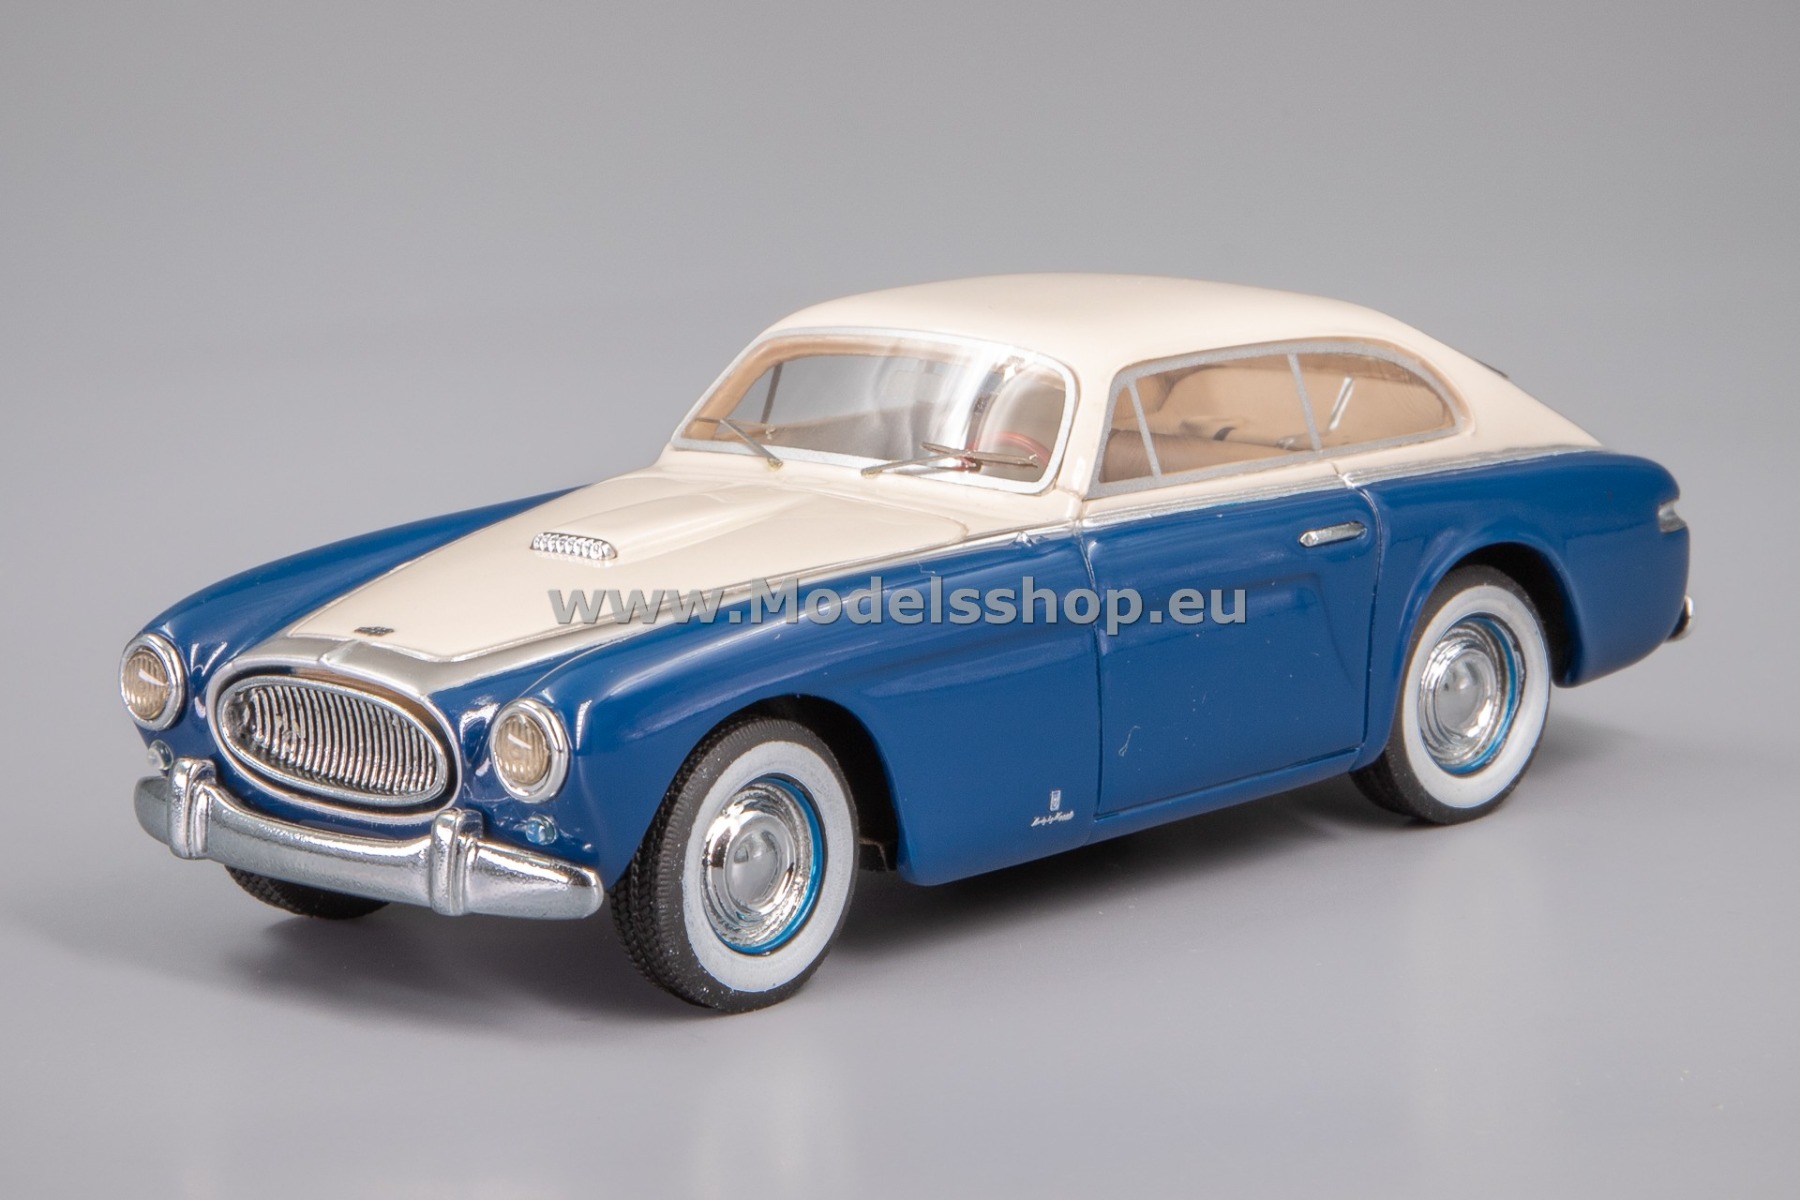 NEO 46545 Cunningham C-3 Continental Coupe by Vignale, 1952 /dark blue - white/